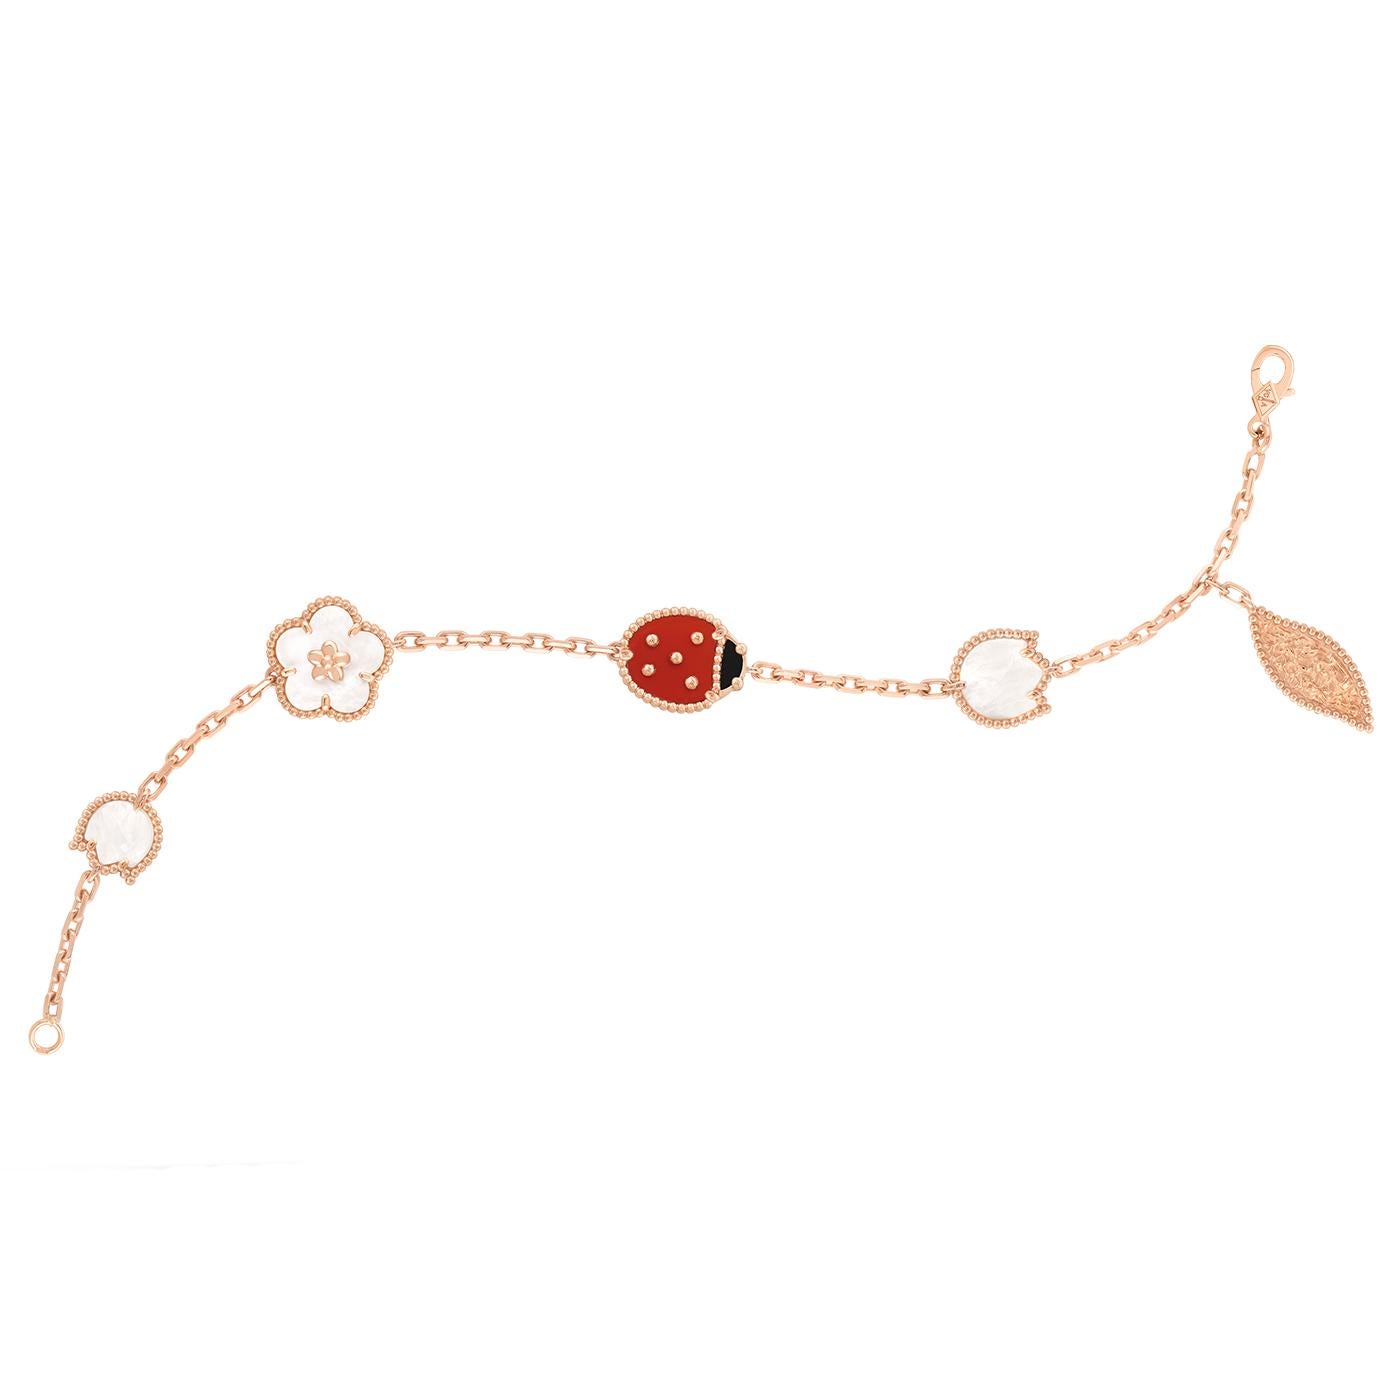 With its ladybugs and floral motifs, the Lucky Spring collection pays tribute to Spring, the season of renewal dear to Van Cleef & Arpels. In 18K rose gold, carnelian, and onyx, the creations enrich the benevolent nature of the Maison's